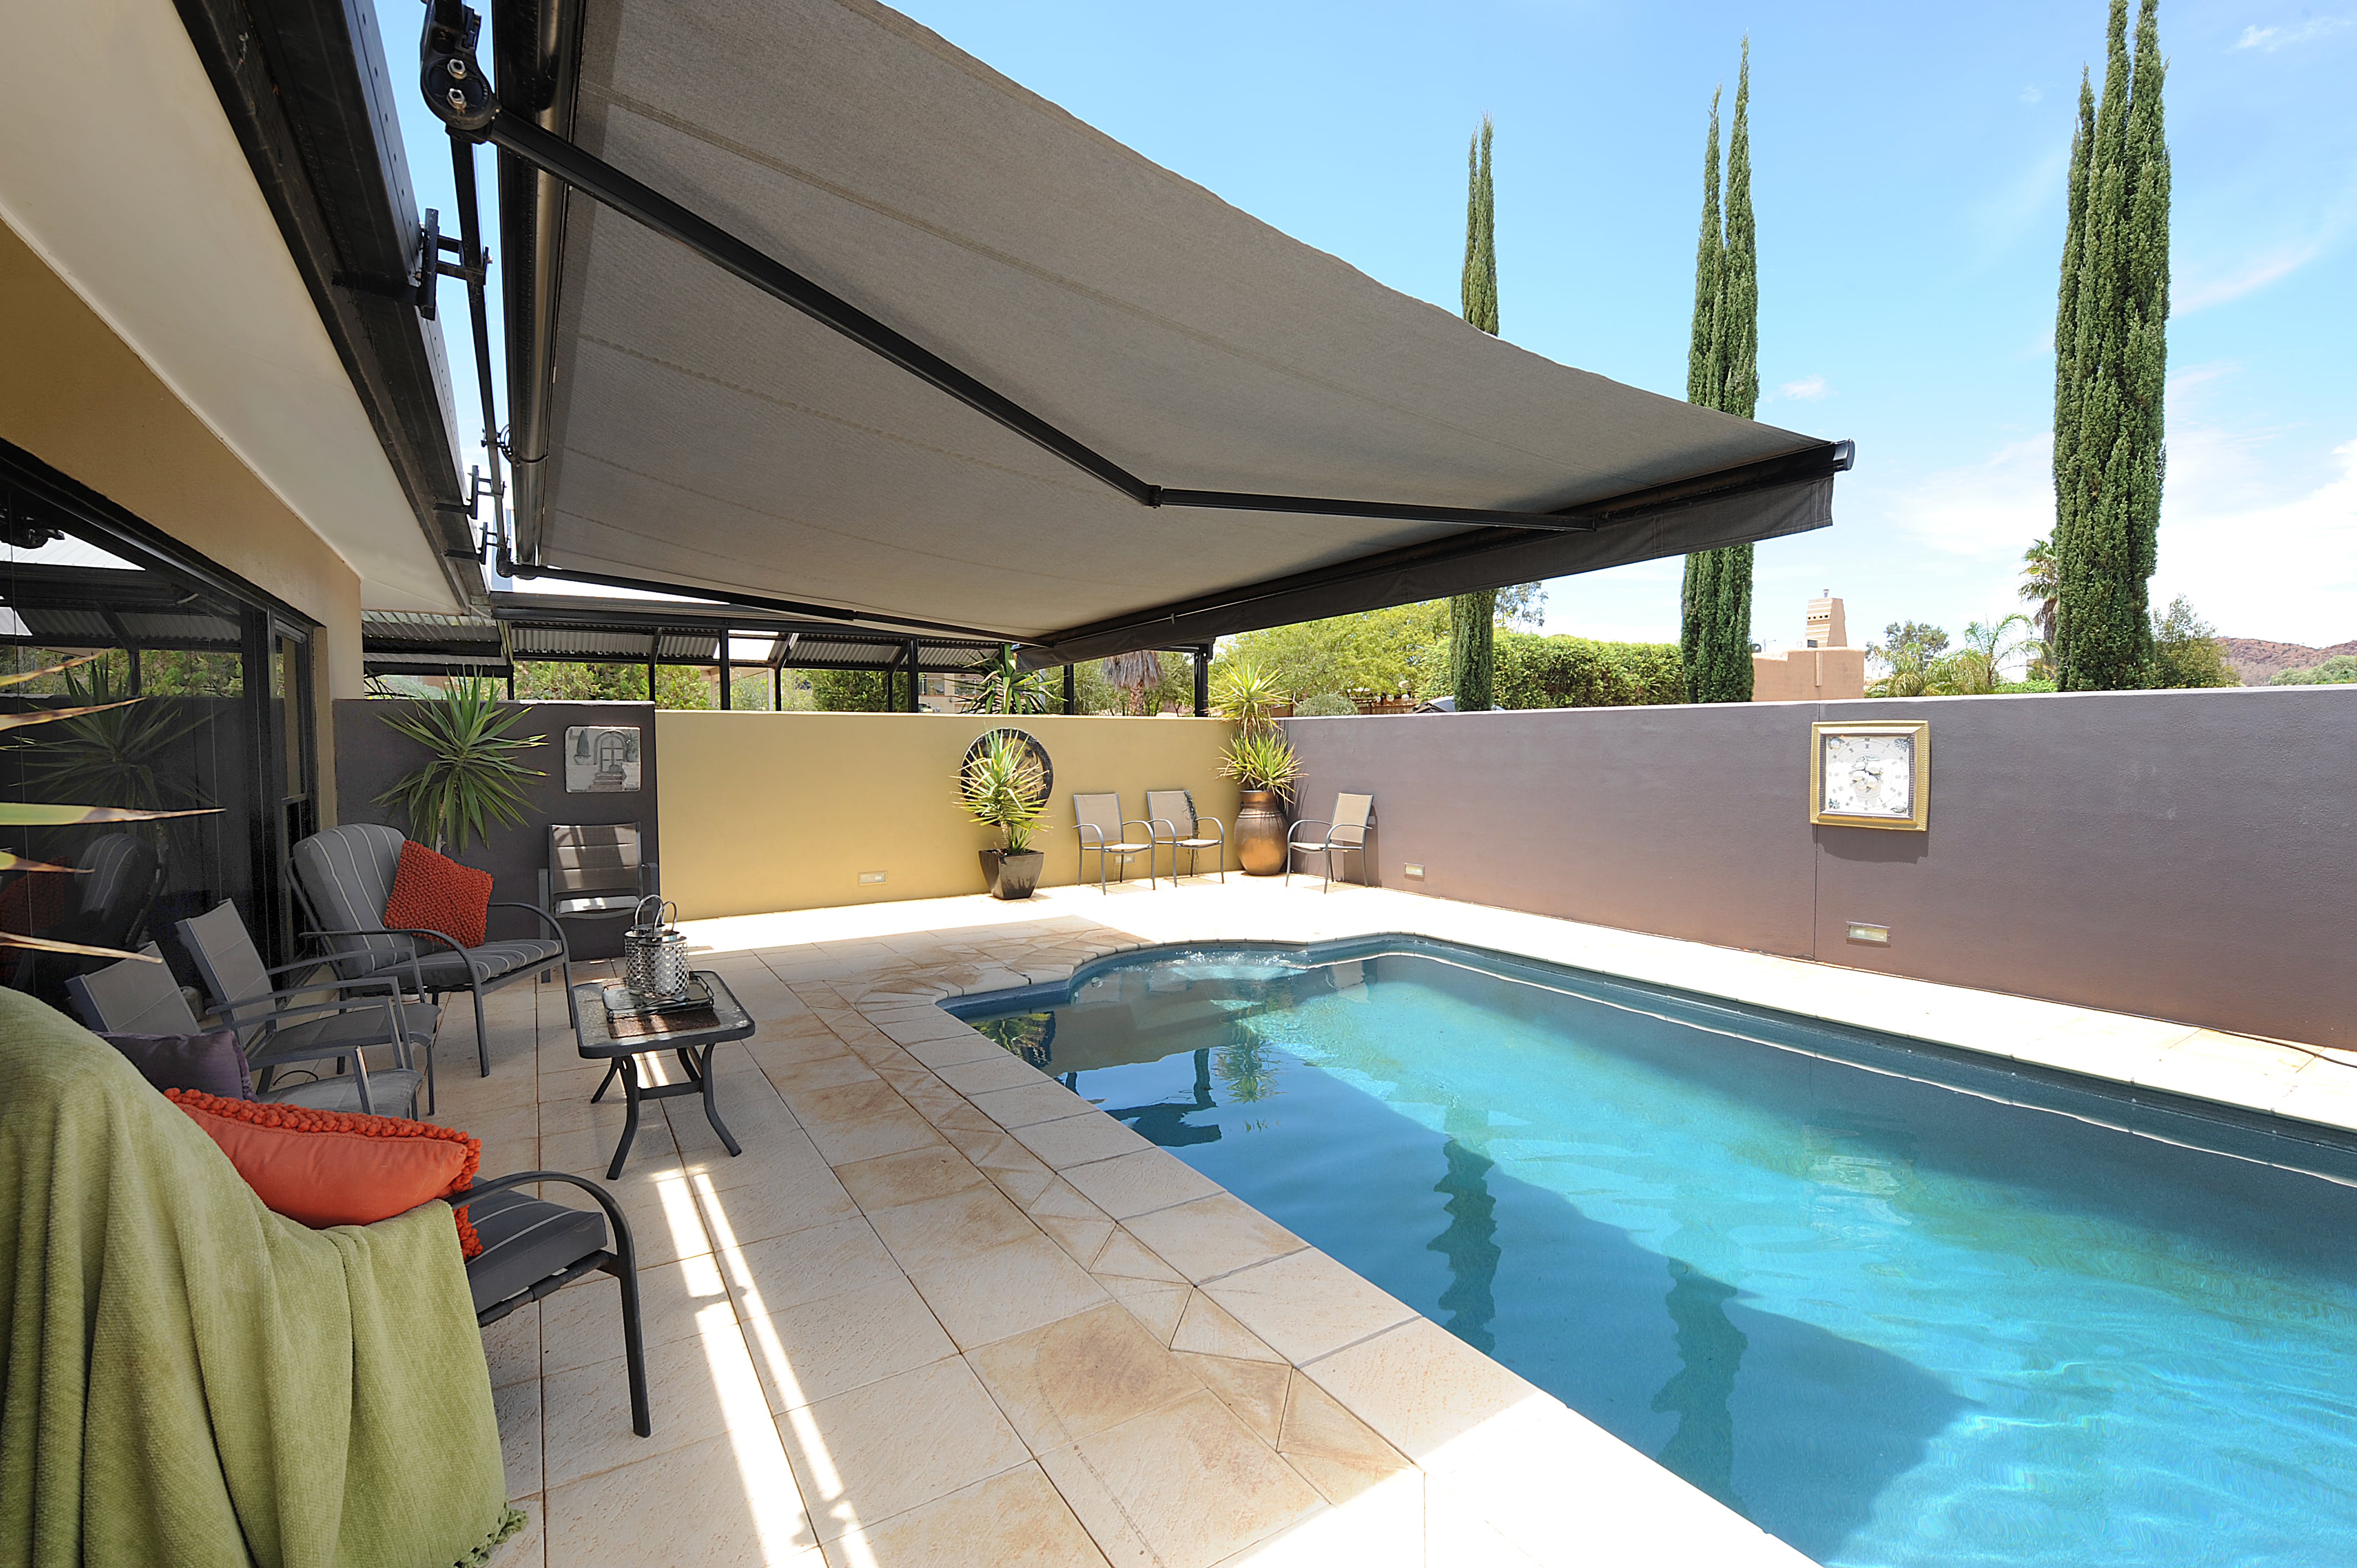 Pool Awning — Shades and Awnings in Alice Springs, NT